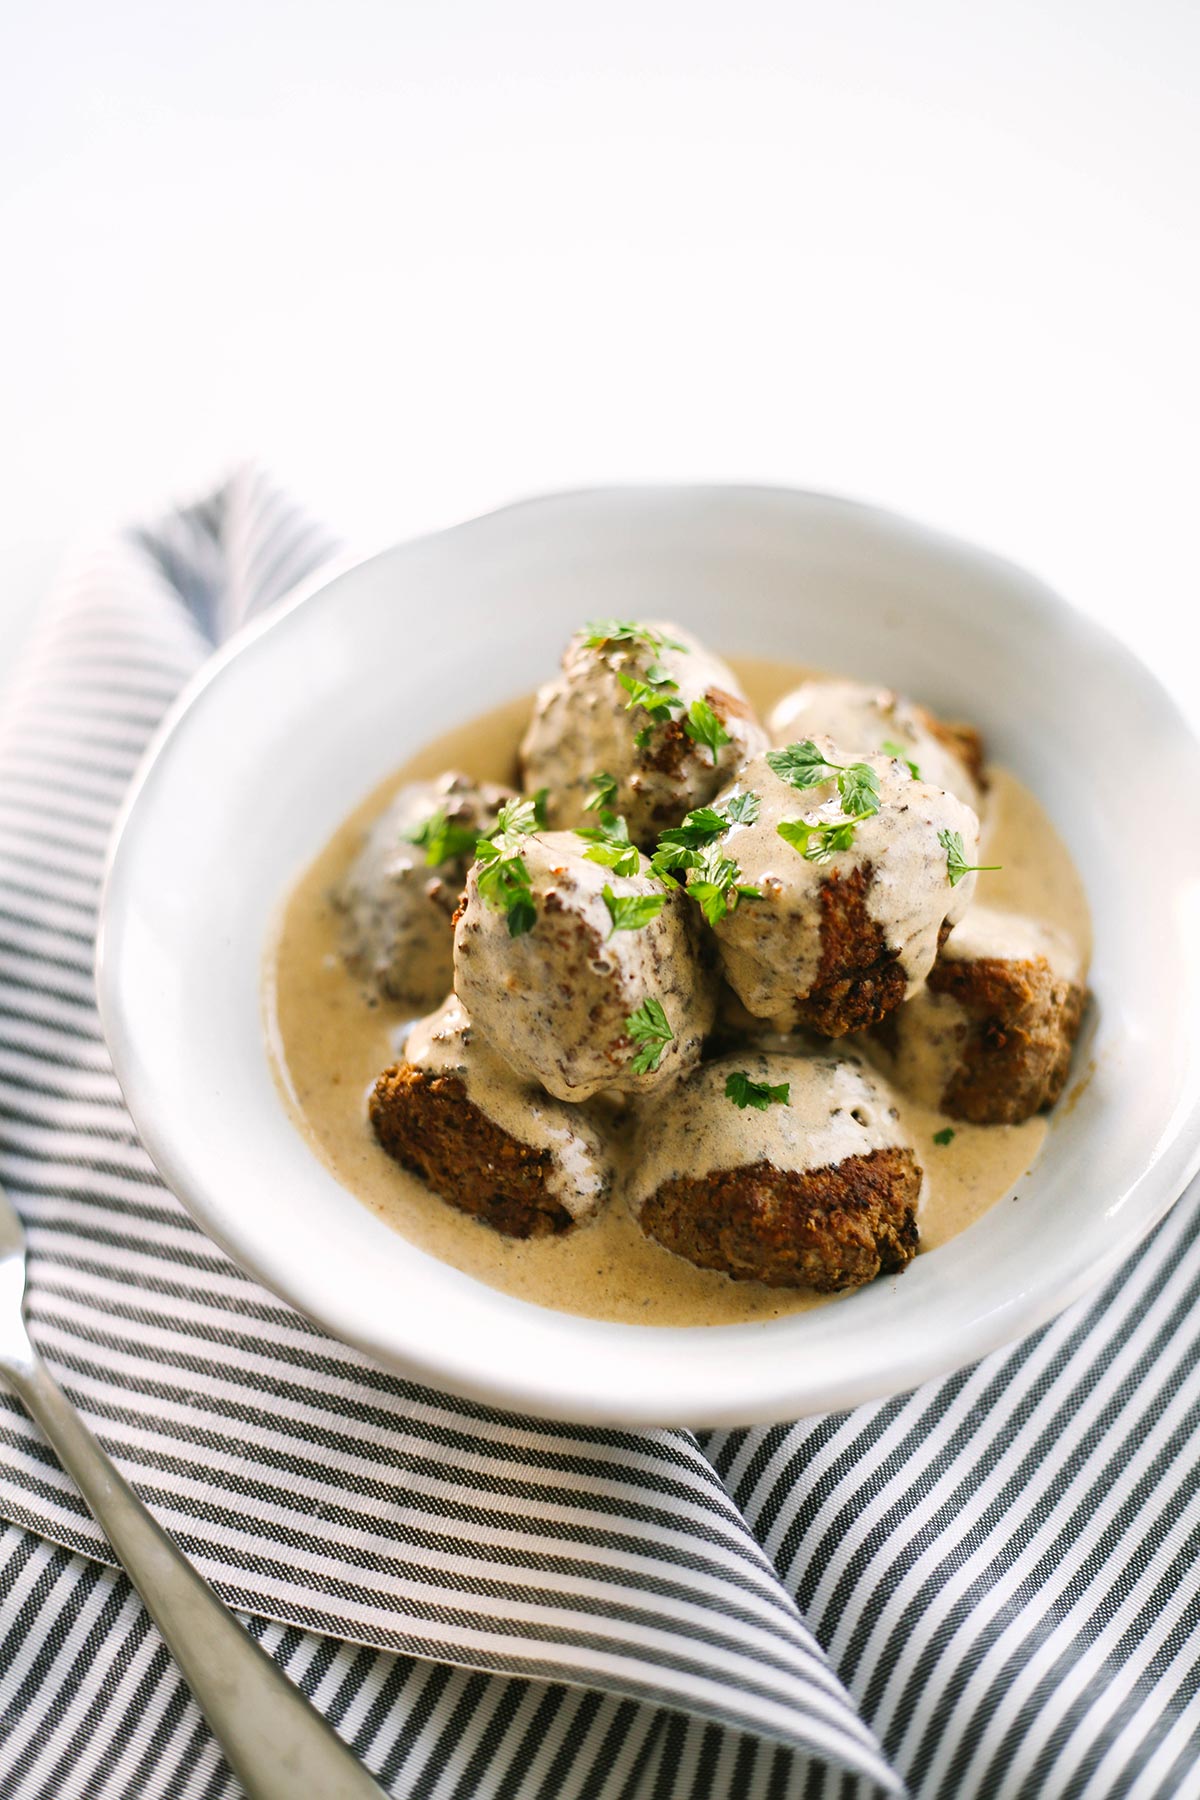 Keto Swedish meatballs for low carb. Easy recipe with allspice and gravy.